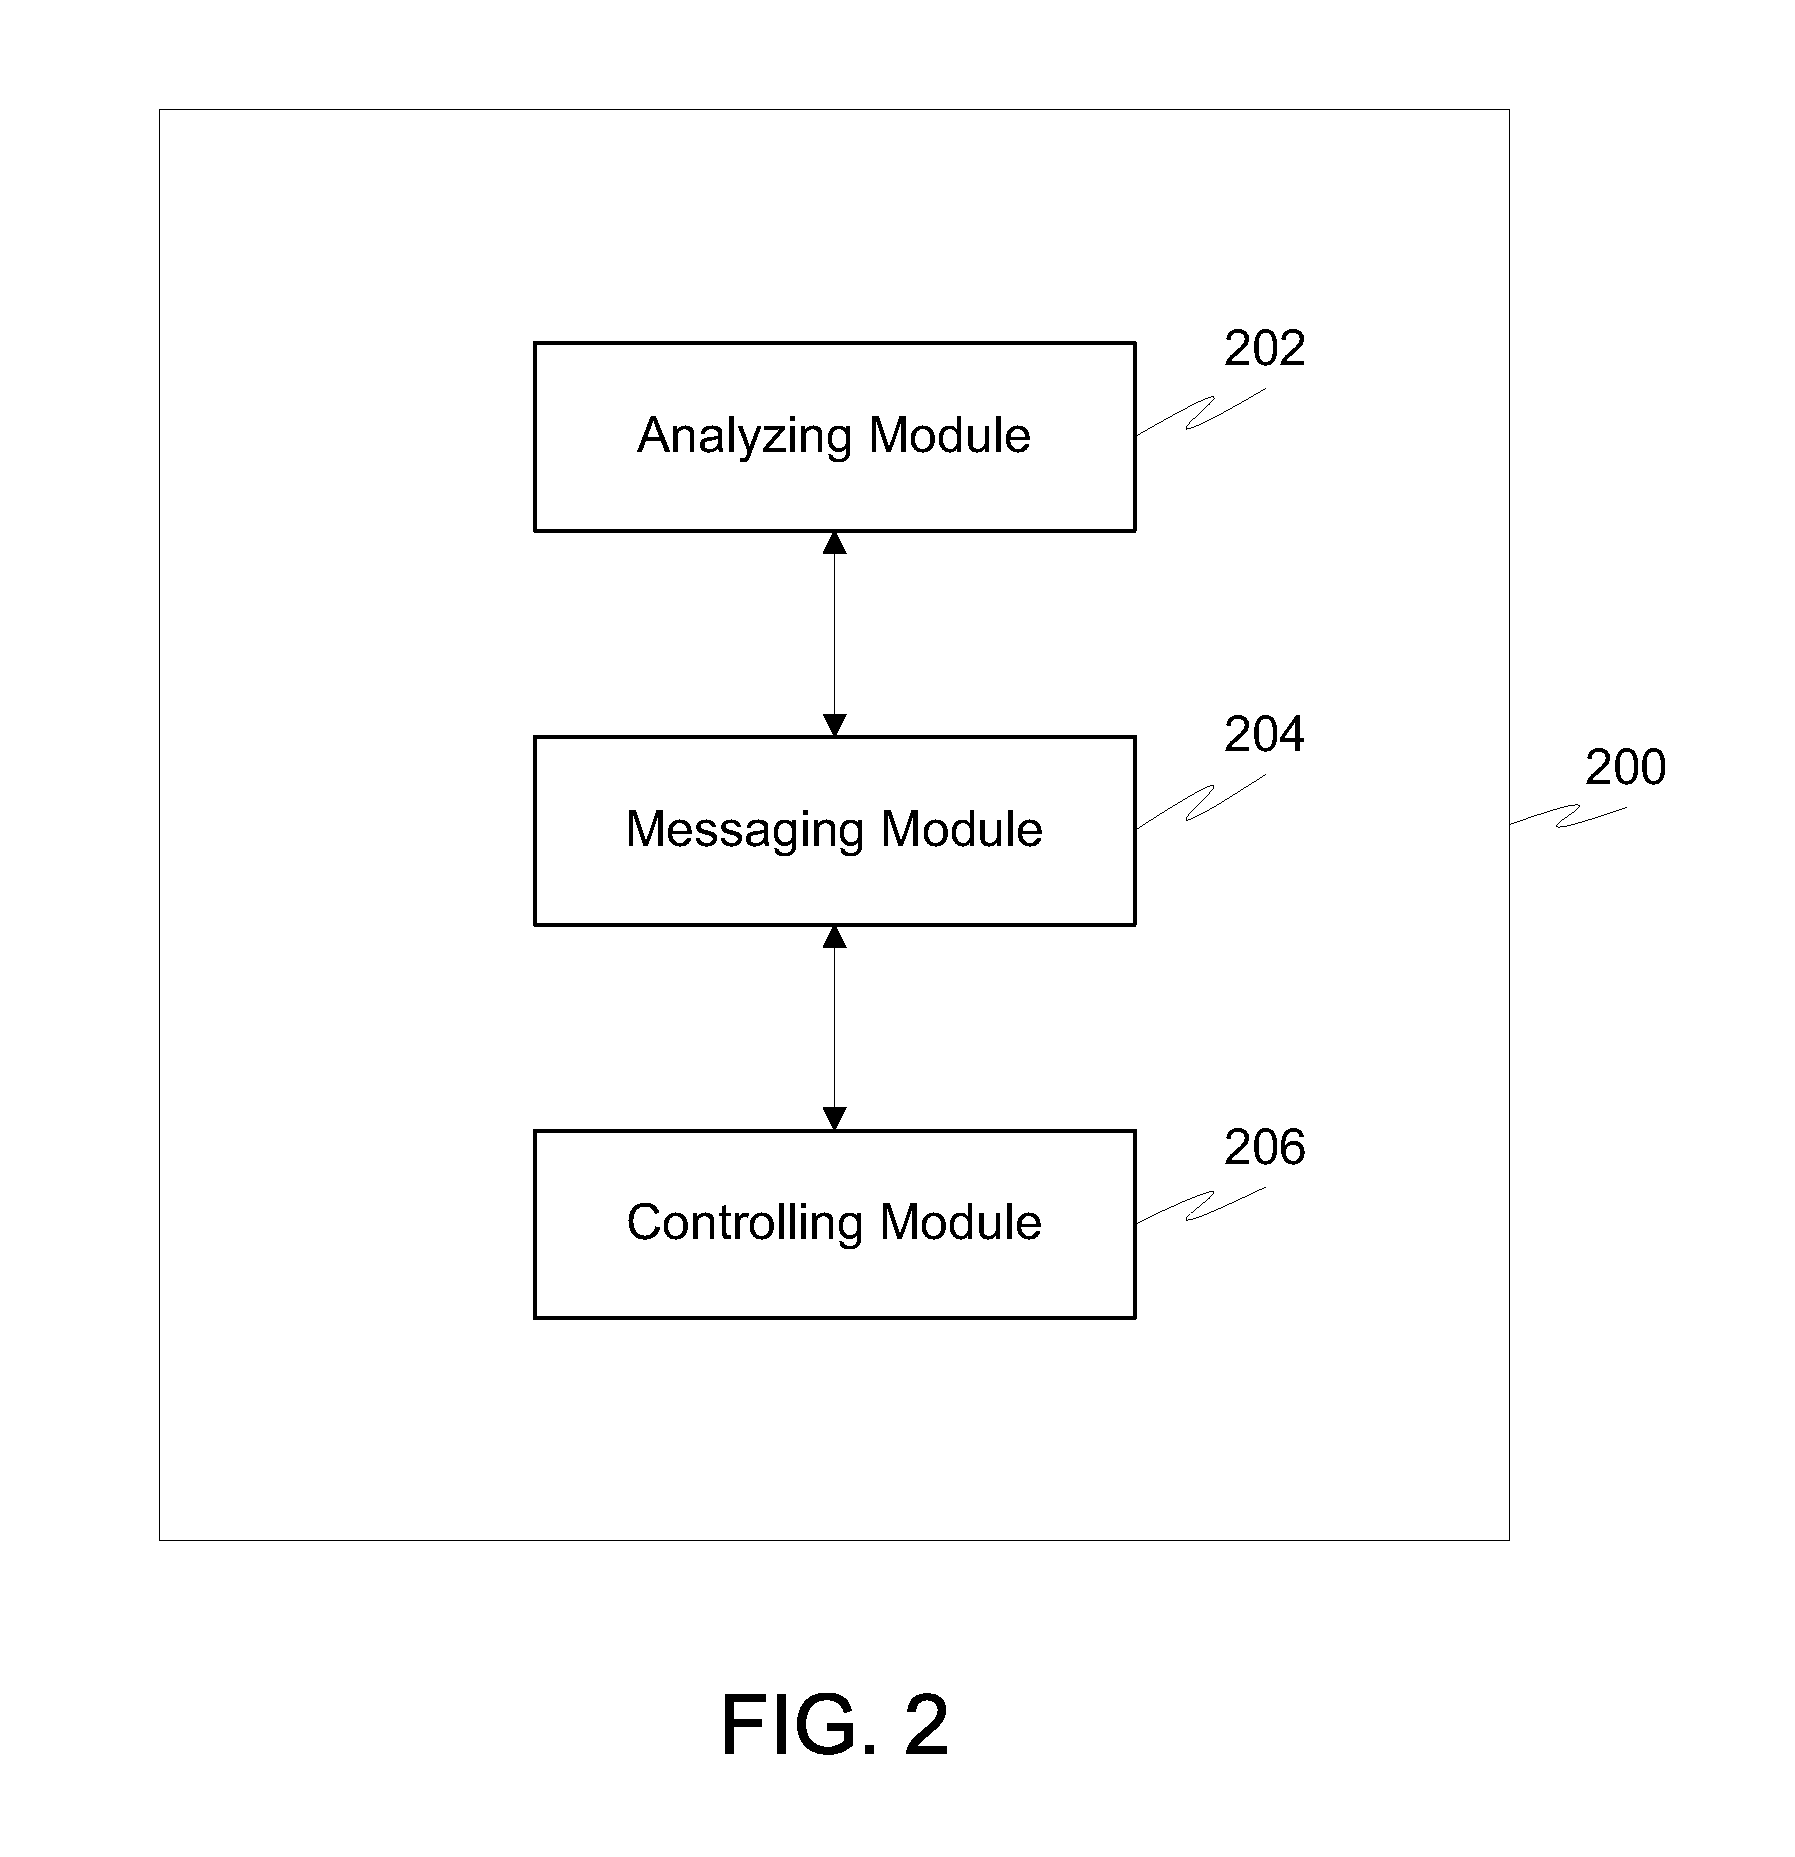 Apparatus and method for controlling traffic flow in backhaul link in wireless communication network